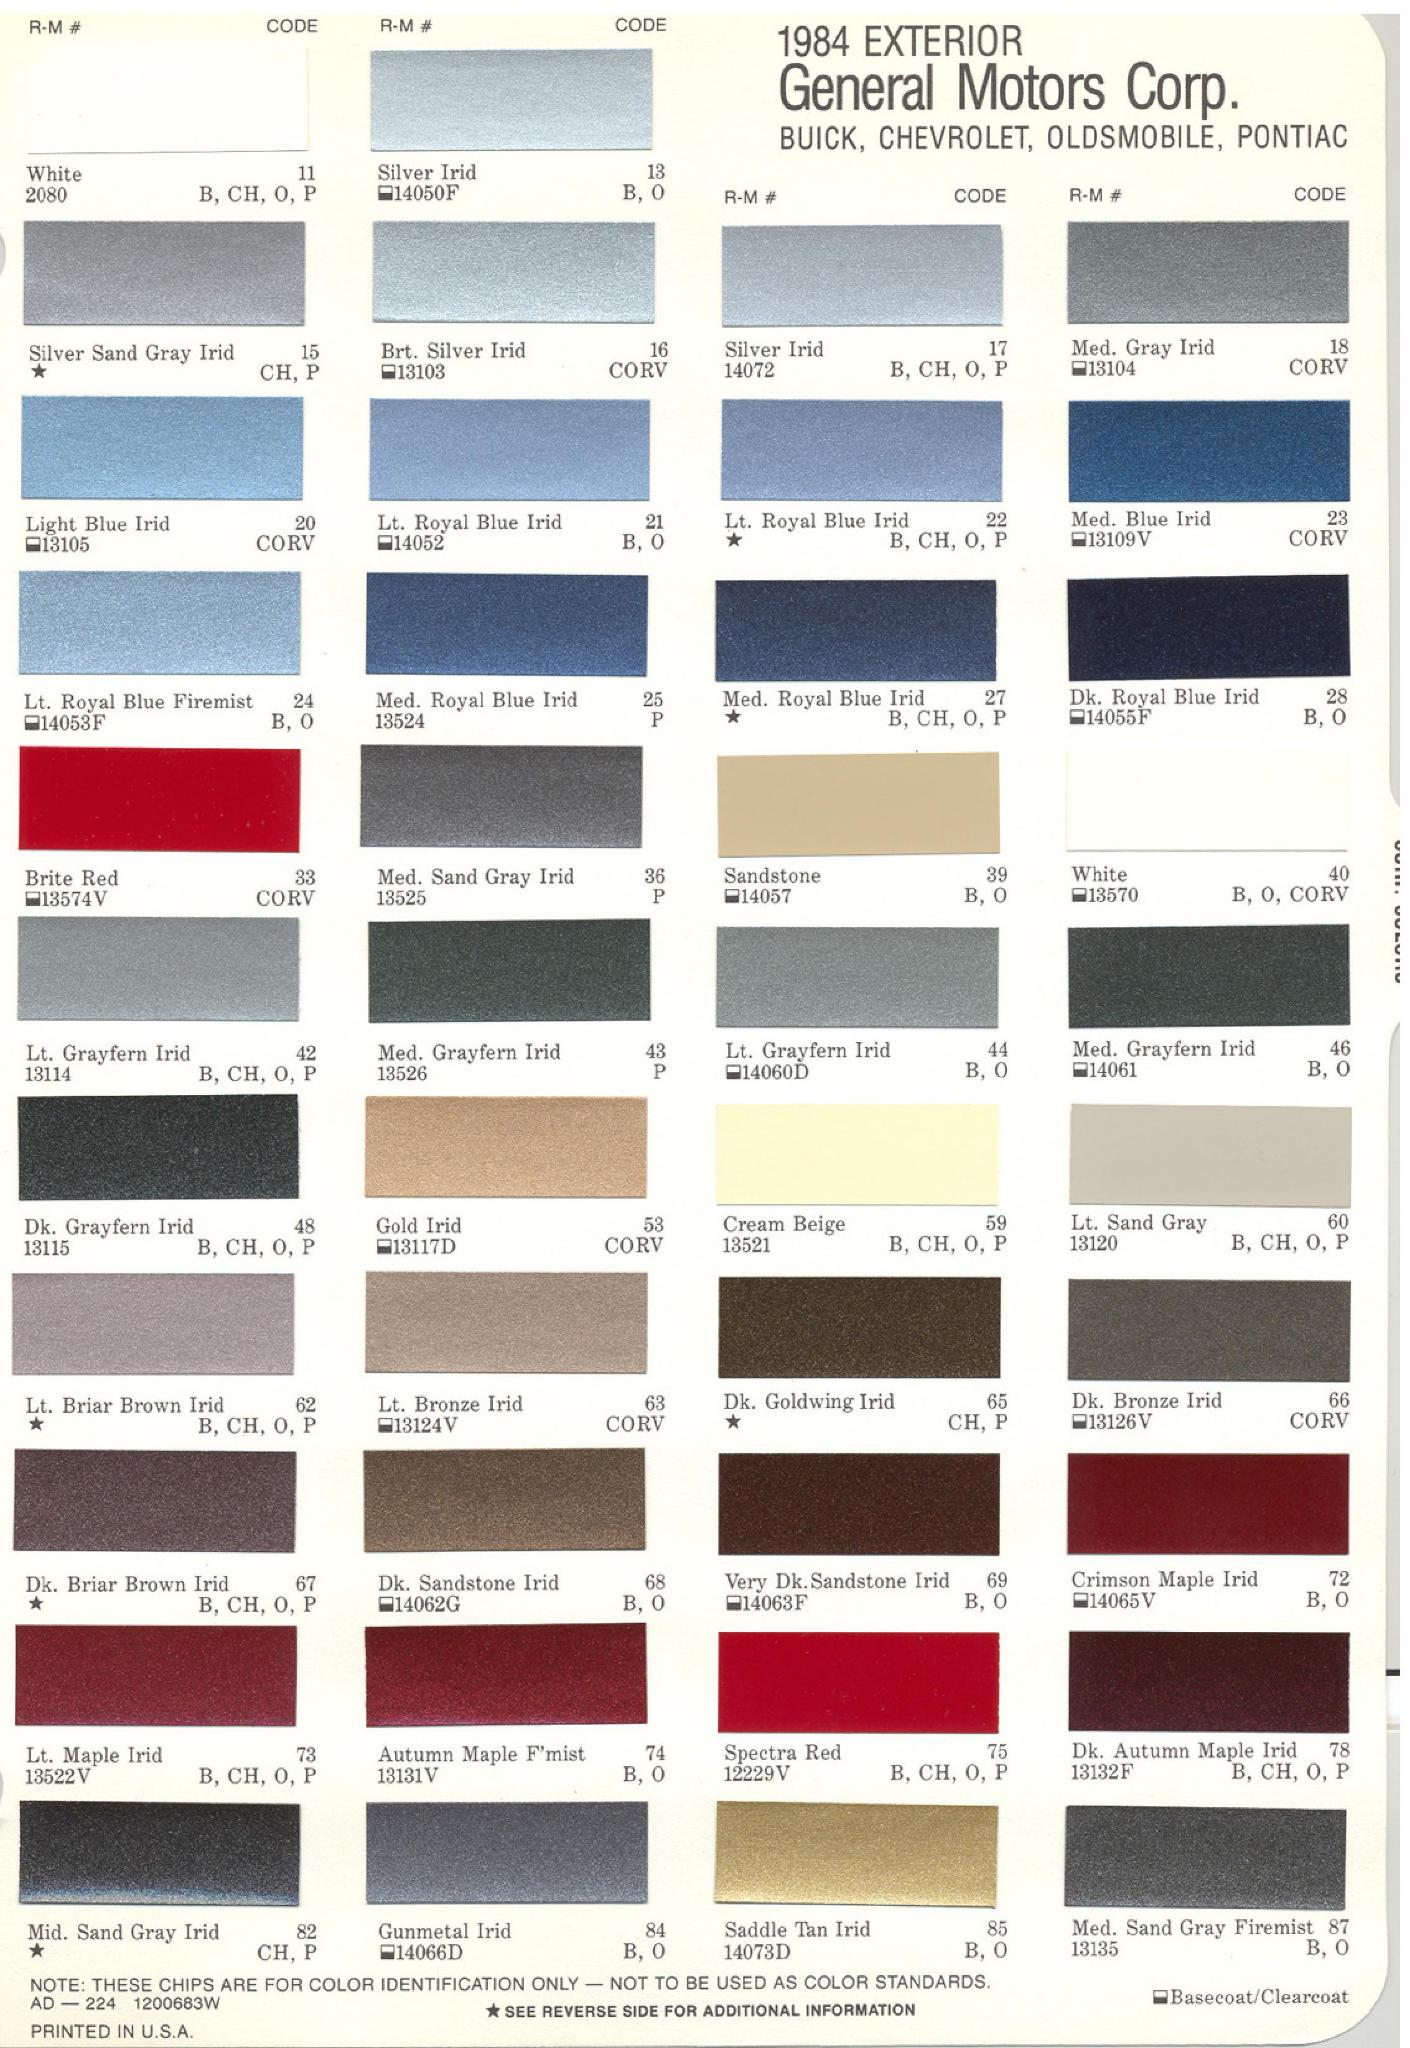 General Motors oem paint swatches, color codes and color names for 1984 vehicles.